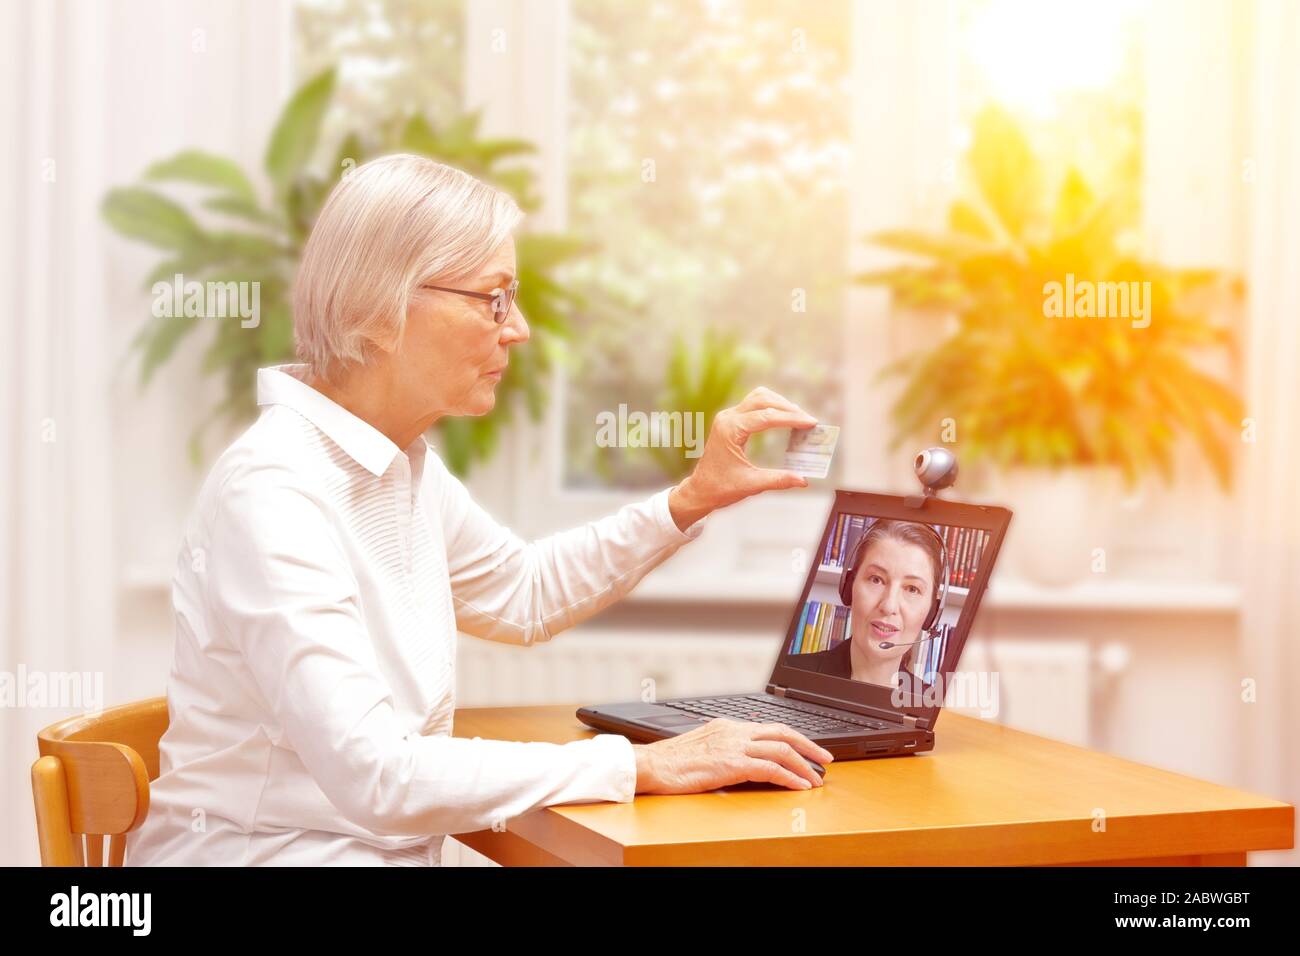 e-id concept: senior woman using a video identification service to open a new bank account with her laptop Stock Photo